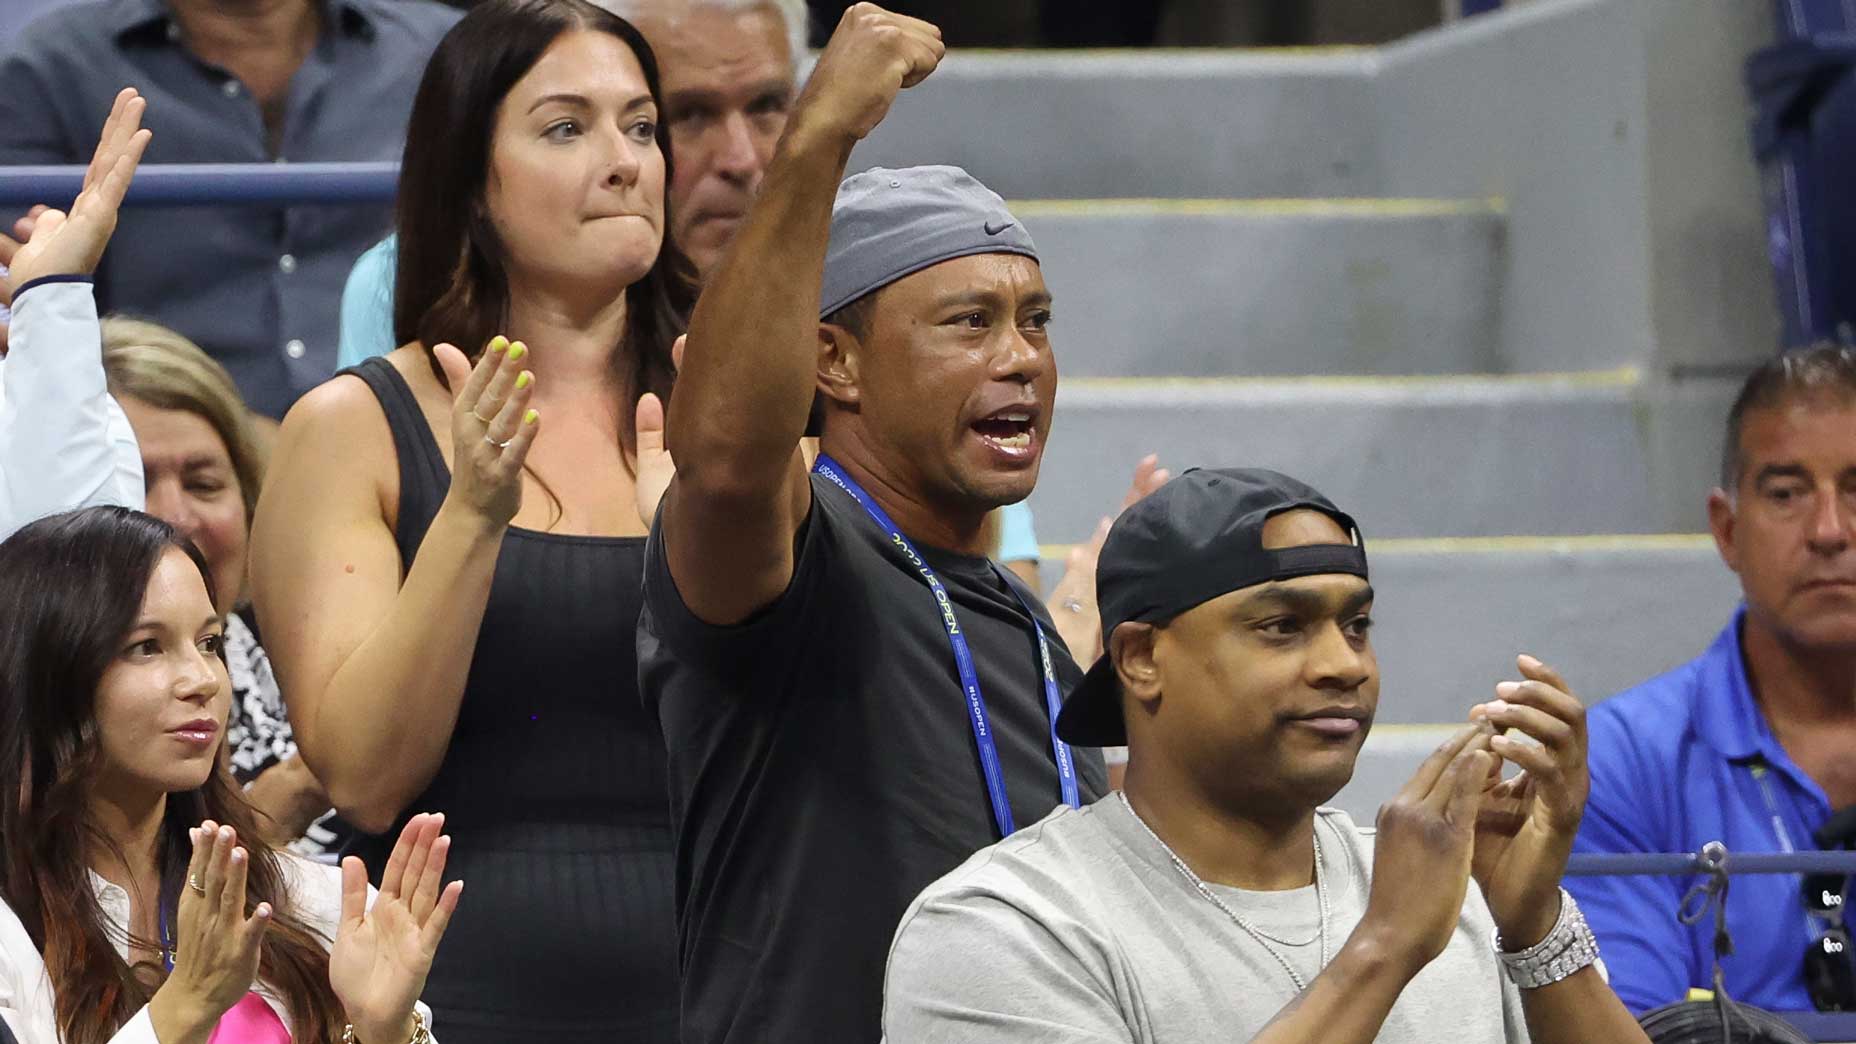 When we saw Tiger Woods watch Serena Williams, we saw something special